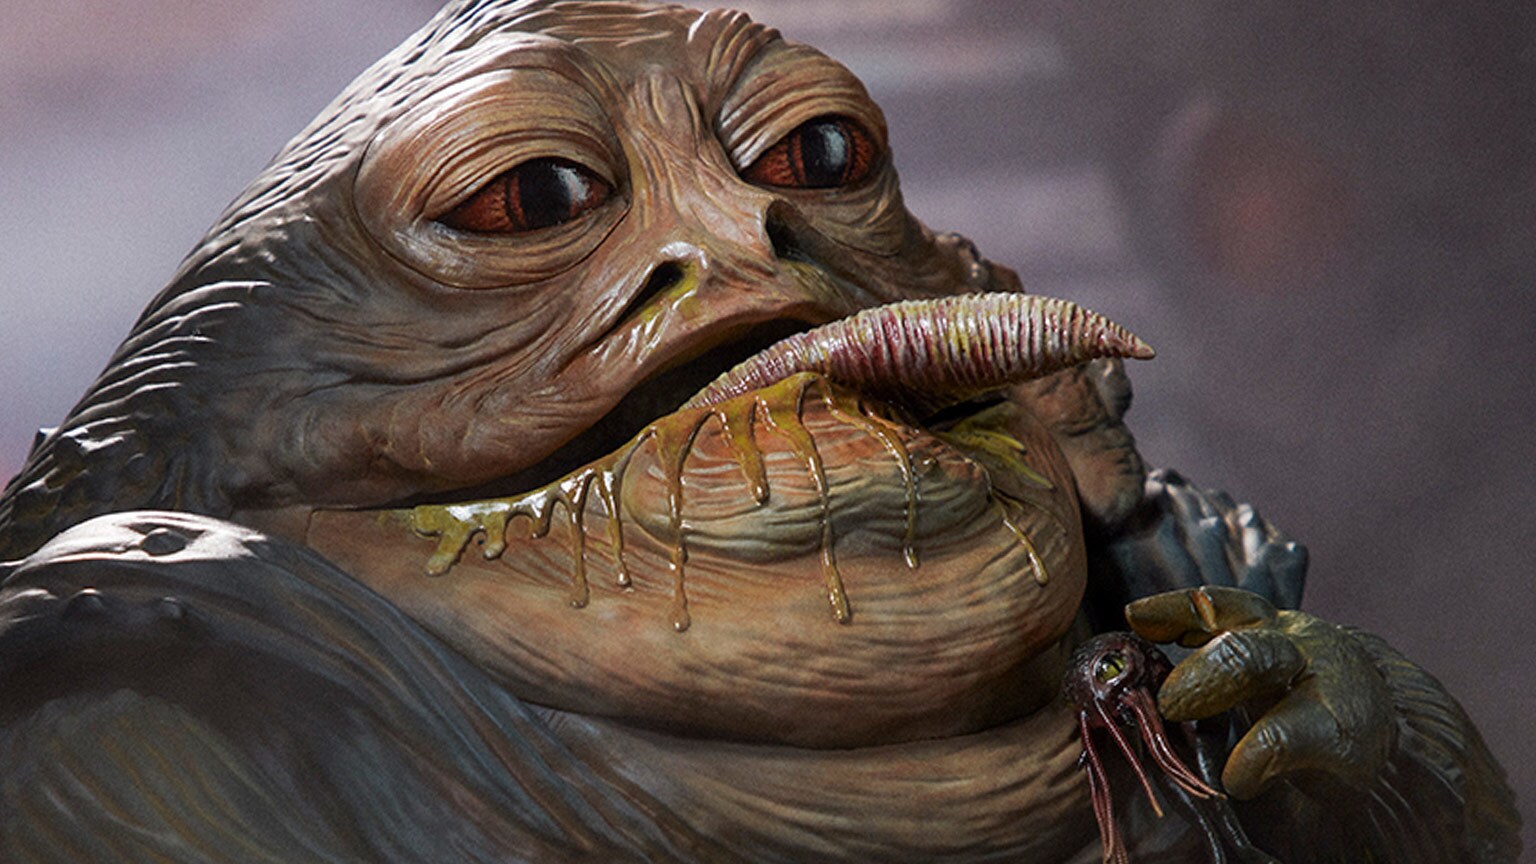 "To Me, He Was a Living, Breathing, Drooling Creature":  Sideshow's Kevin Ellis on Making Jabba the Hutt